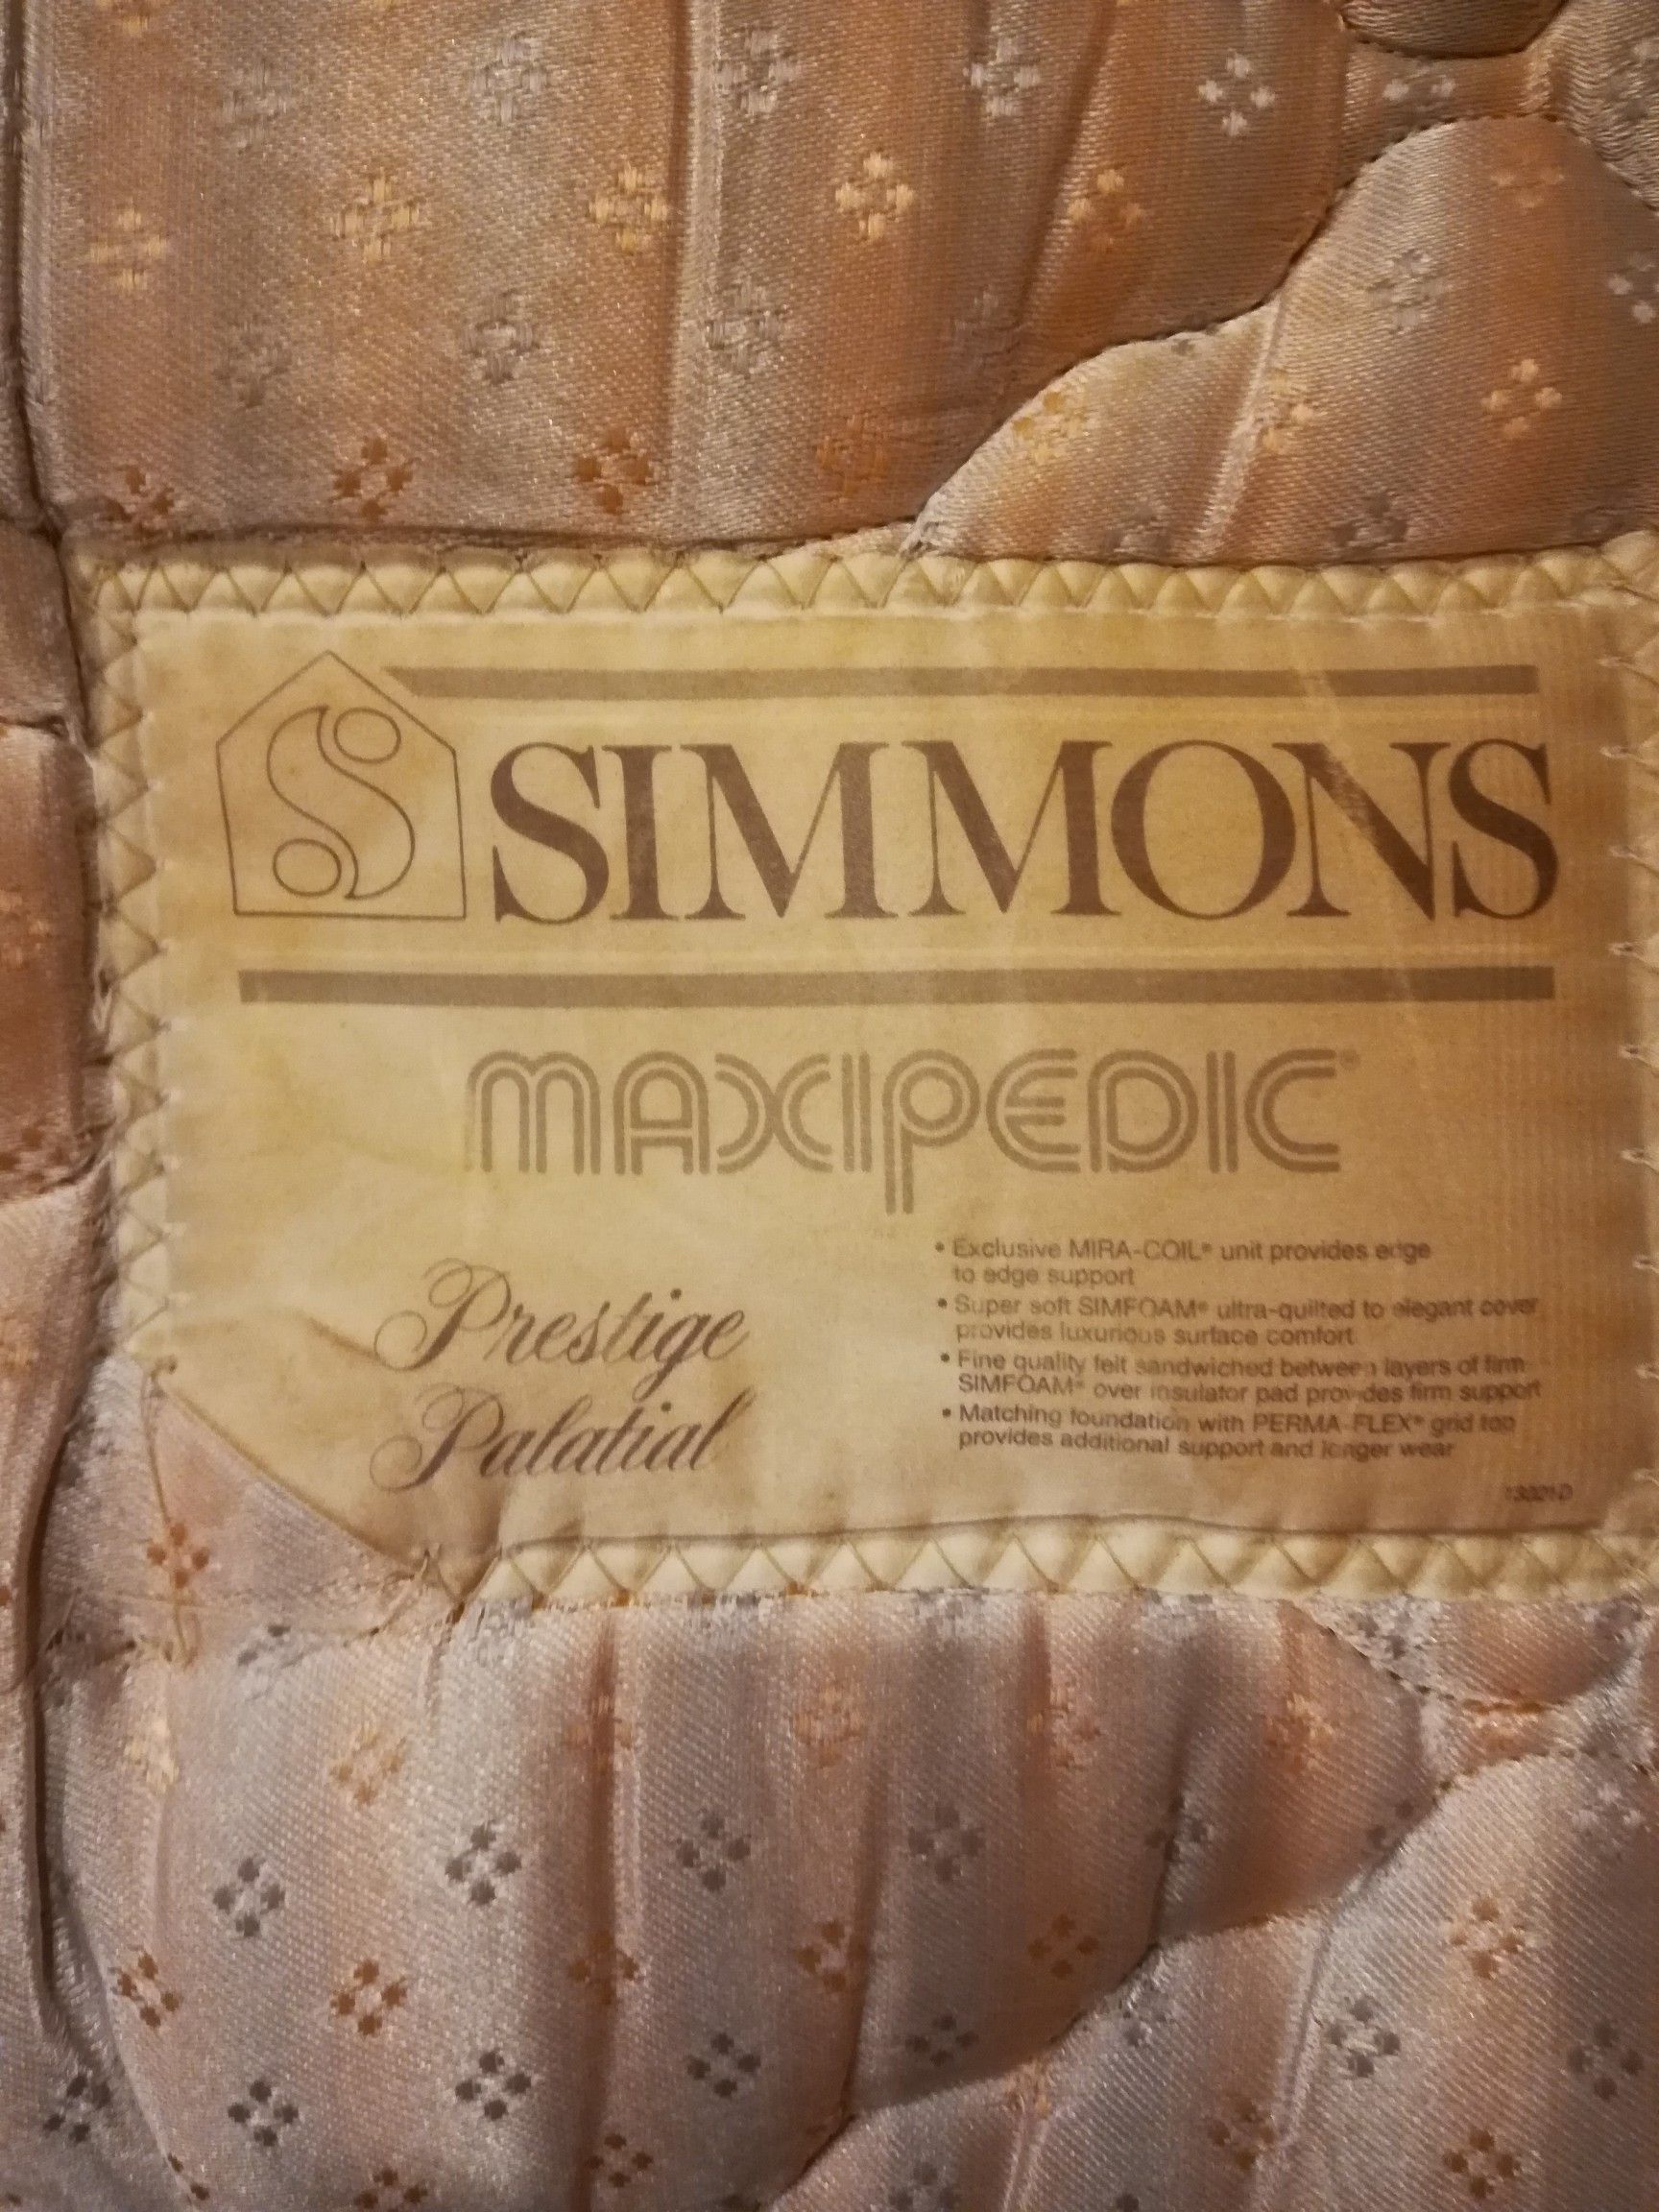 Mattress without box spring - Simmons Maxipedic prestige palatial mattress with box spring - Full size